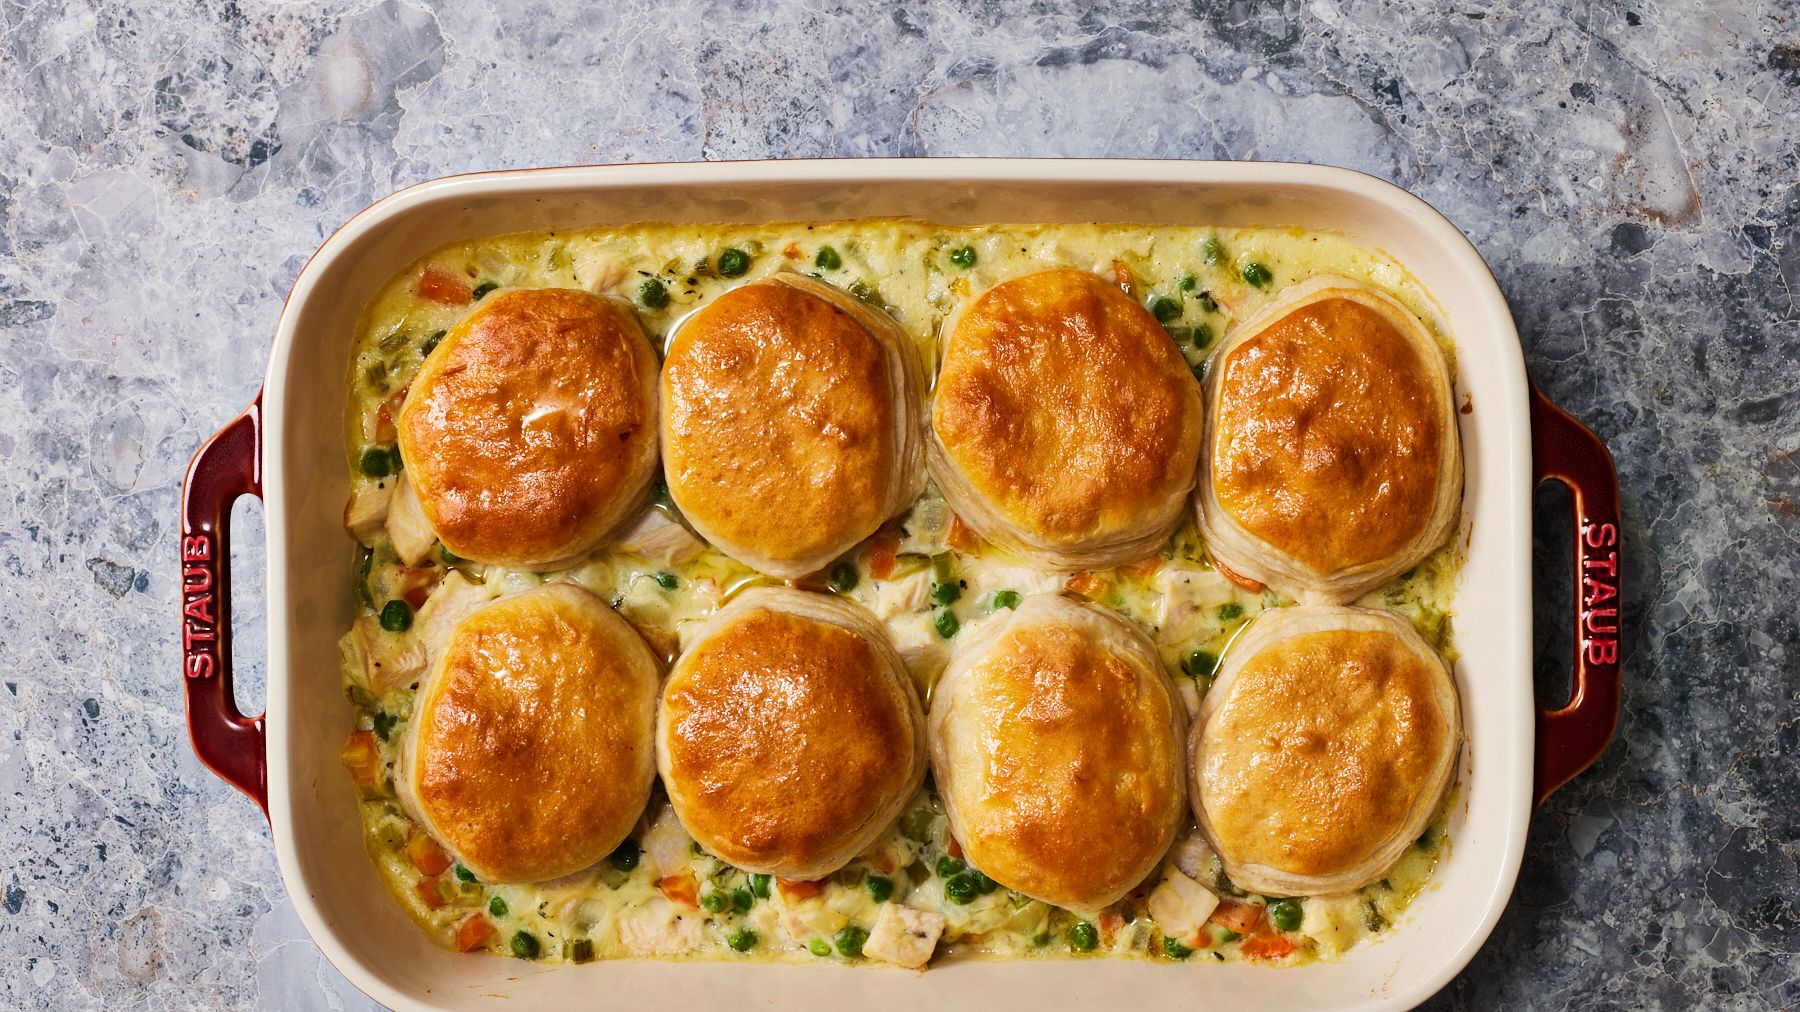 https://hips.hearstapps.com/hmg-prod/images/210923-delish-seo-chicken-pot-pie-horizontal-pulled-back-0181-eb-1633535178.jpg?crop=1xw:0.8430474604496253xh;center,top